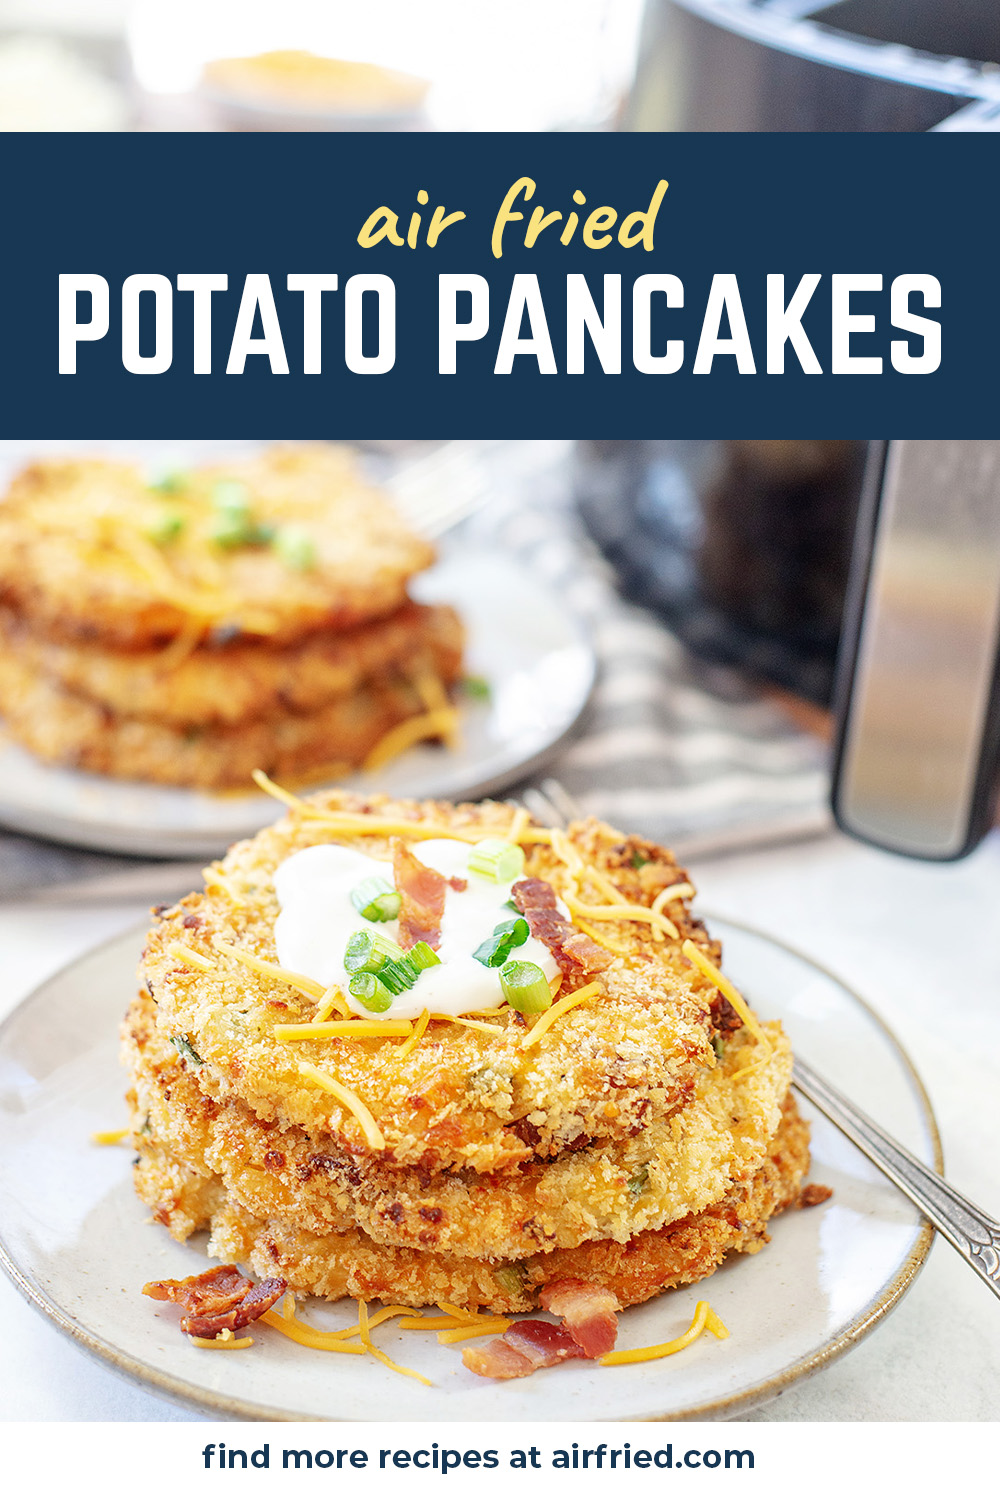 These savory pancakes are super easy to make in the air fryer!